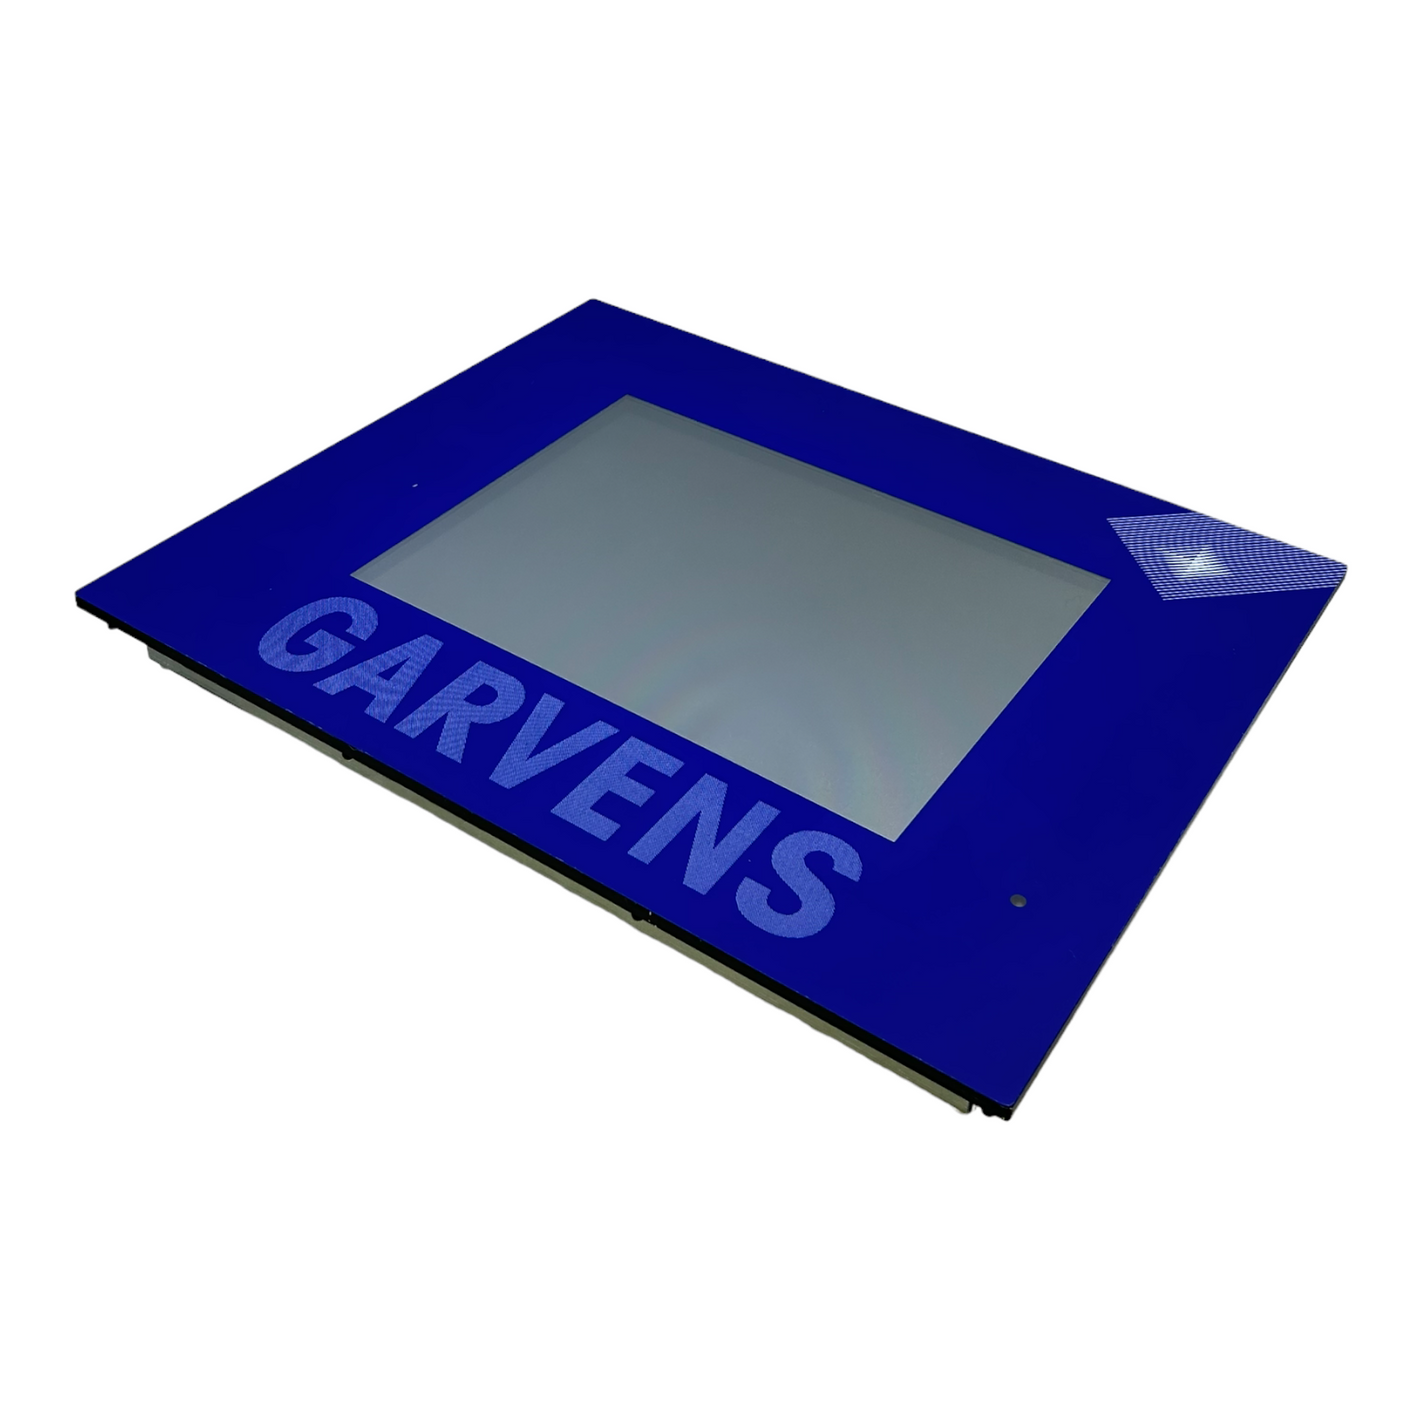 Garvens W2000_MONO touch panel SGAB420-5586-04 for industrial use 24V DC